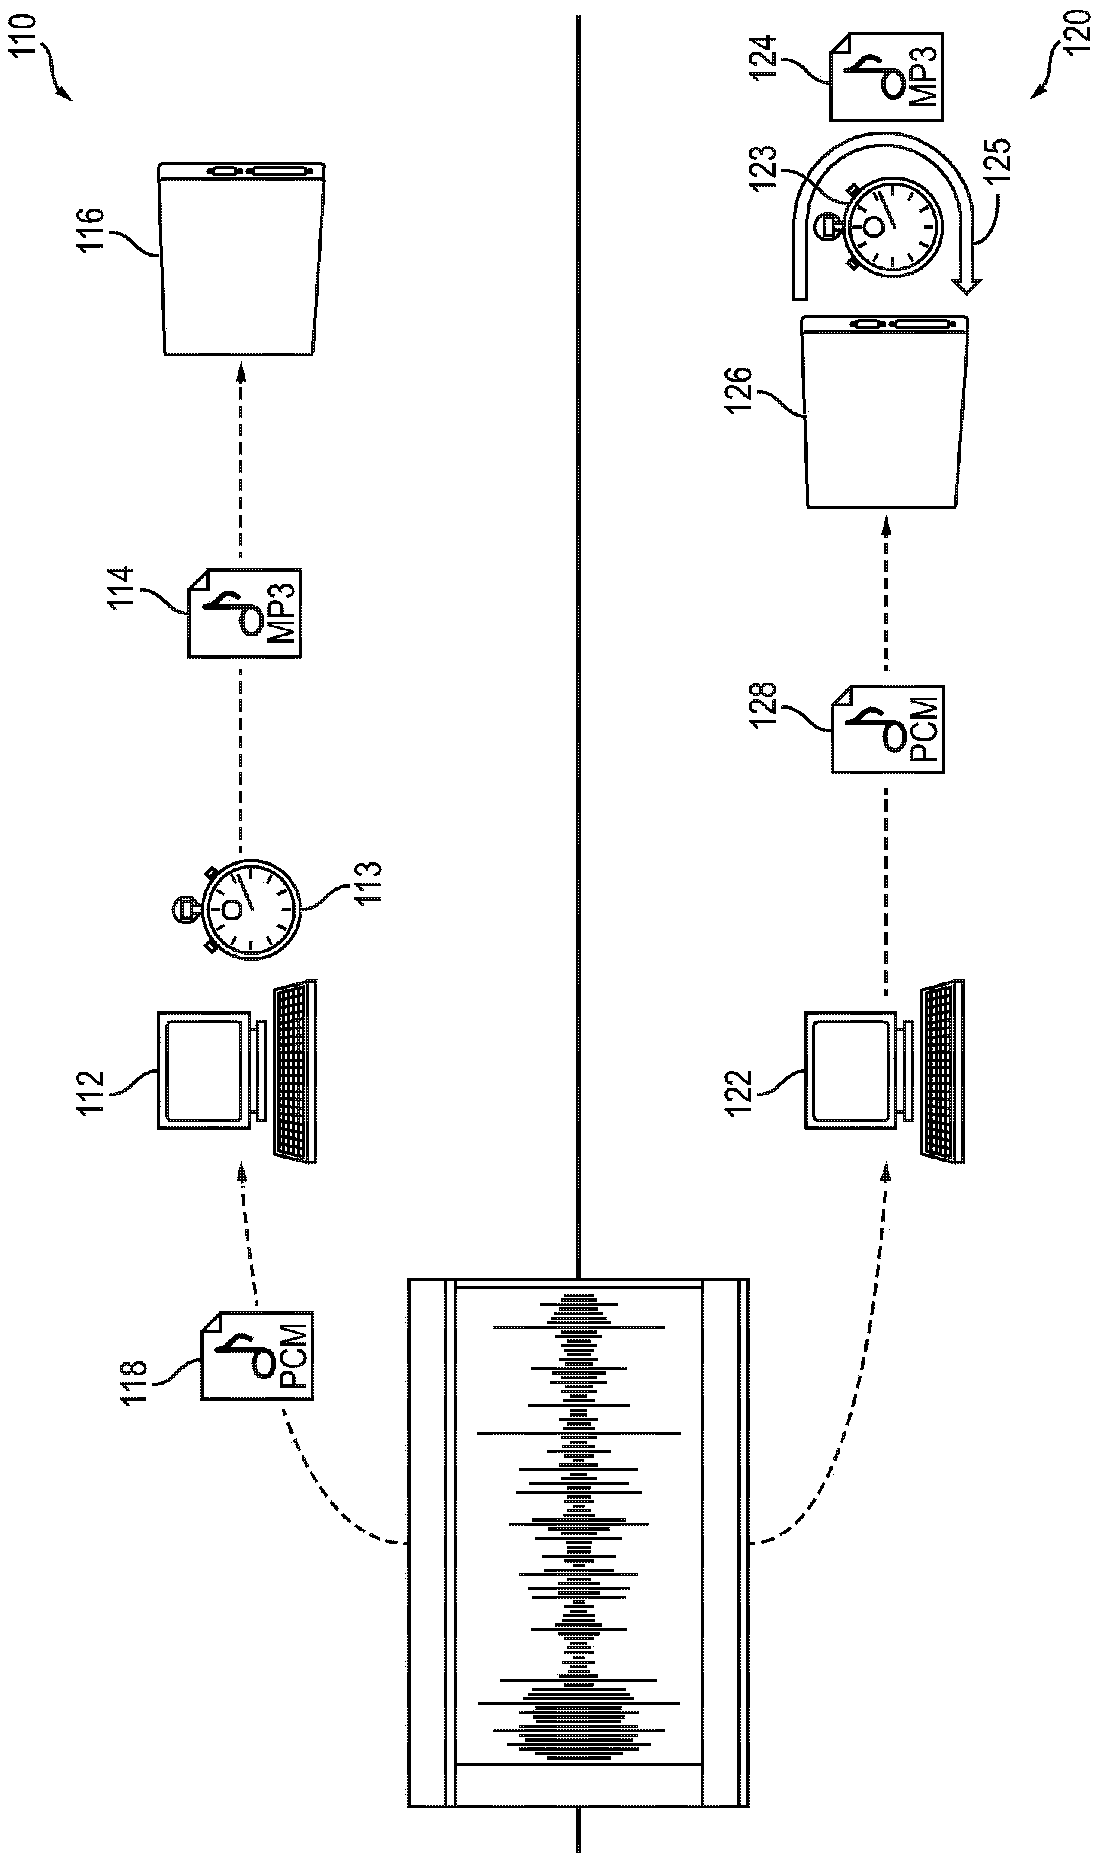 Compression system on storage device and method of compressing data on storage device